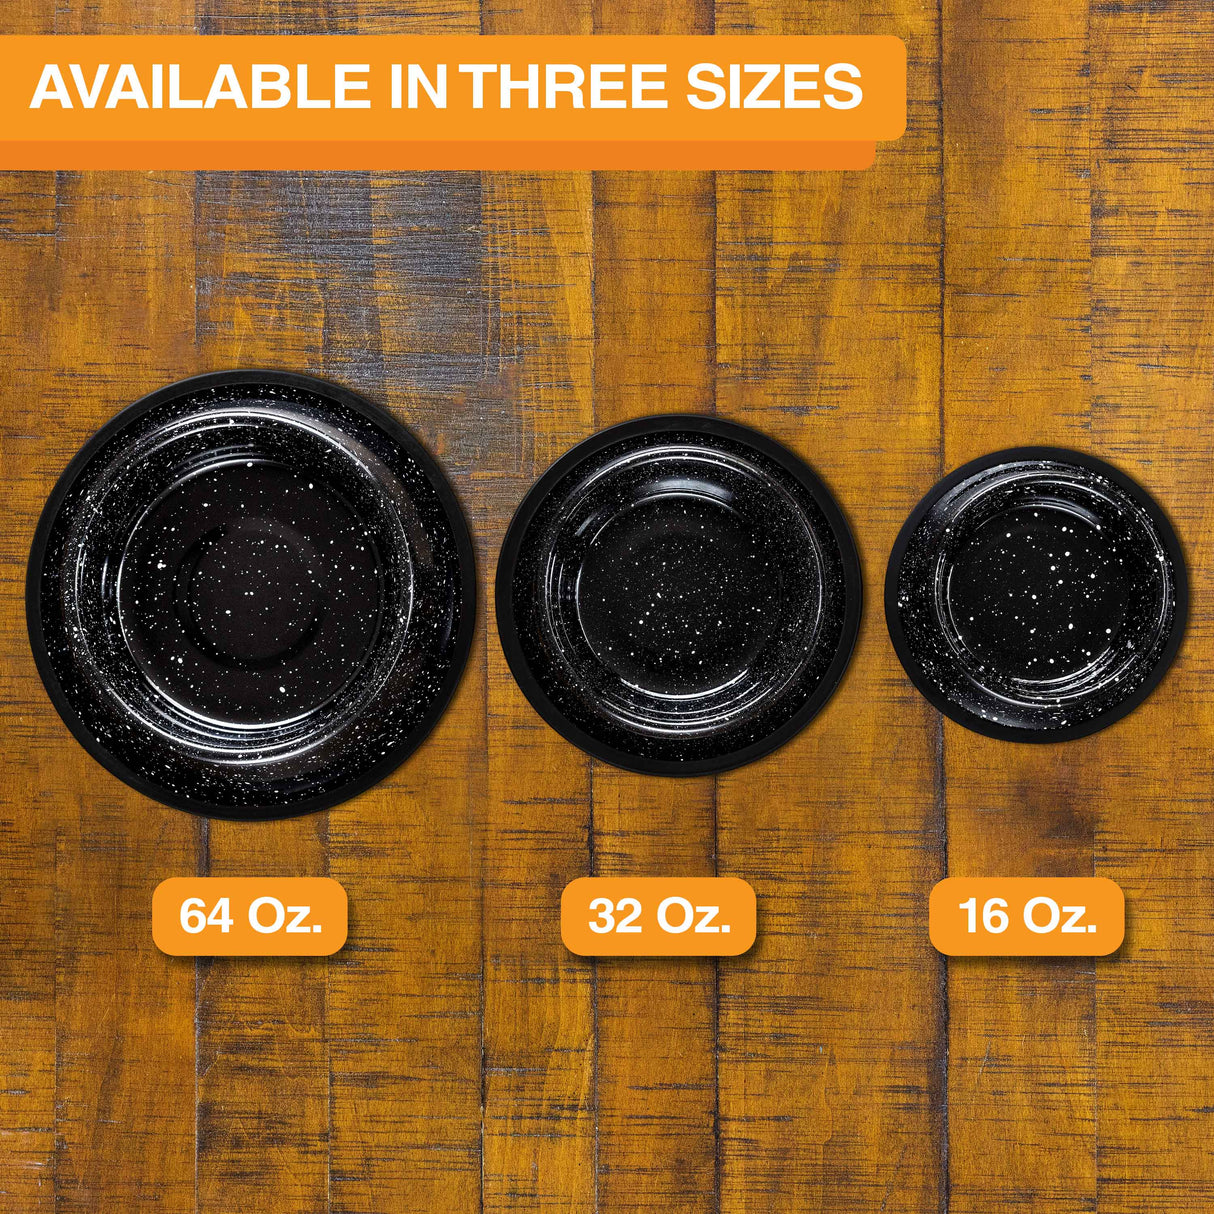 Black Camping Bowl in 64 ounce, 32 ounce and 16 ounce.